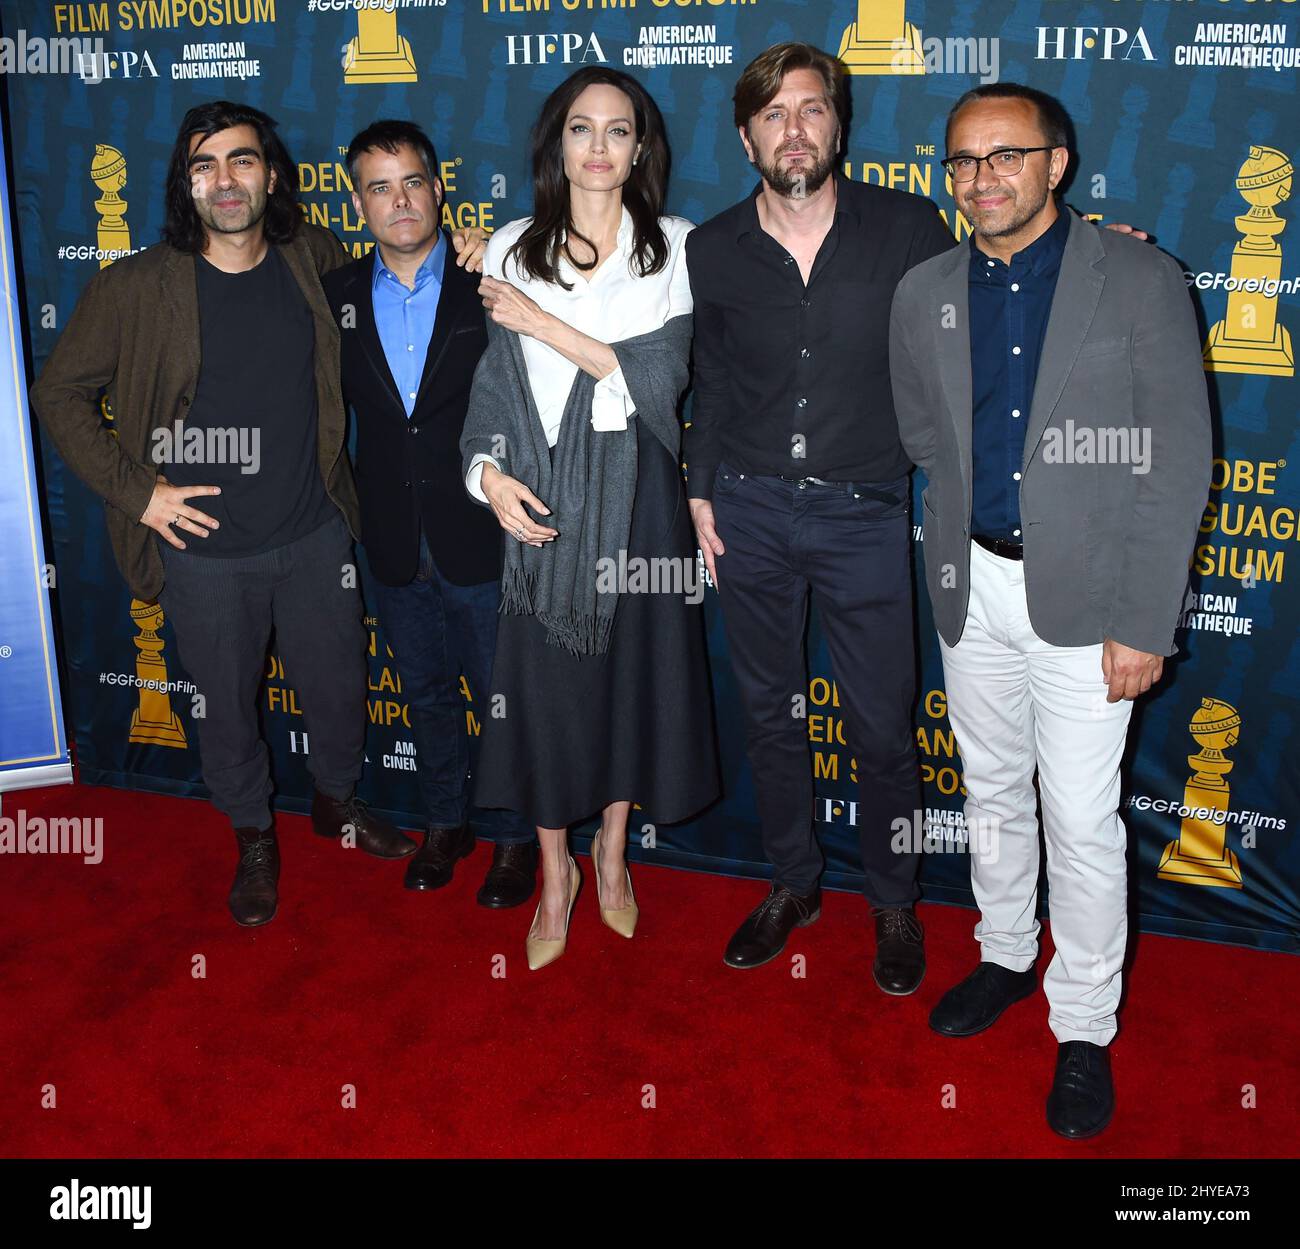 Fatih Akin, Sebastian Lelio, Angelina Jolie, Ruben Ostlund and Andrey Zvyagintsev at the HFPA and American Cinematheque present the Golden Globe Foreign-Language nominees series 2018 symposium held at the Egyptian Theatre on January 6, 2018 in Hollywood, CA Stock Photo